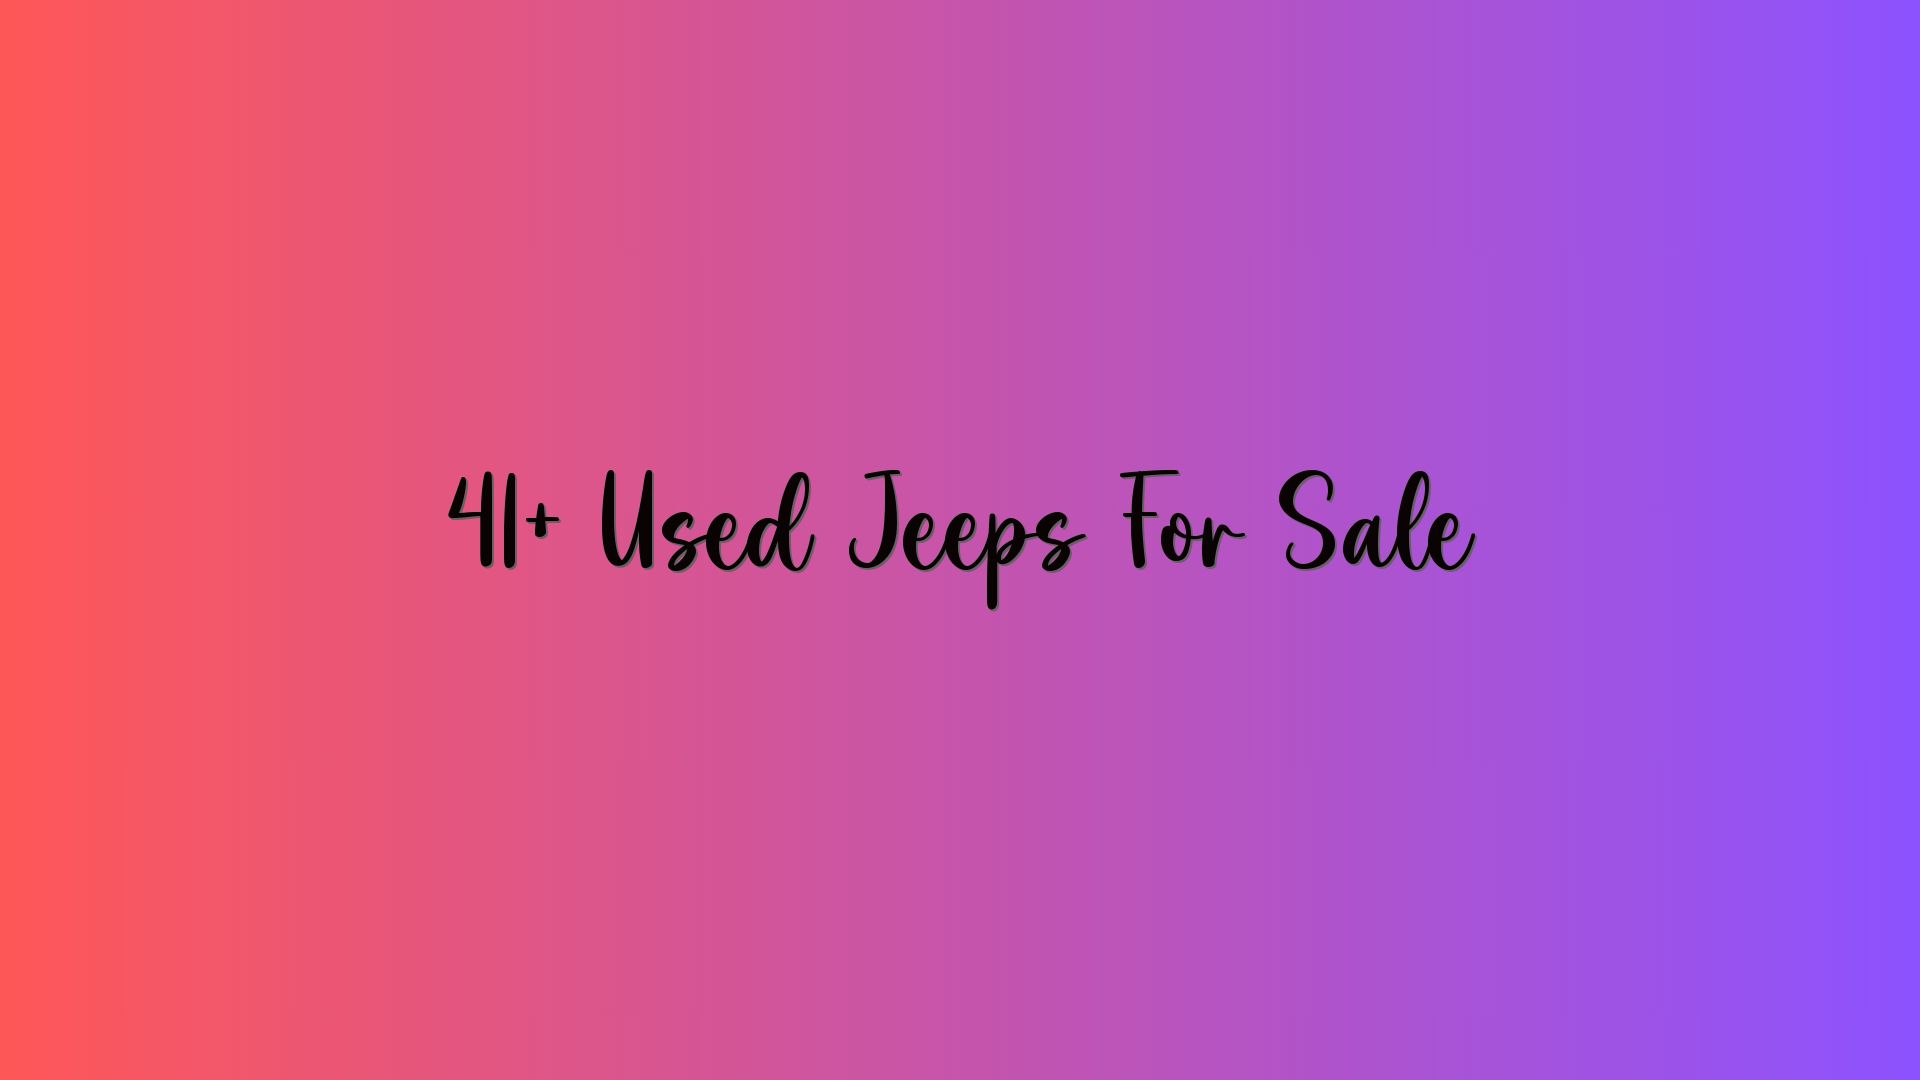 41+ Used Jeeps For Sale